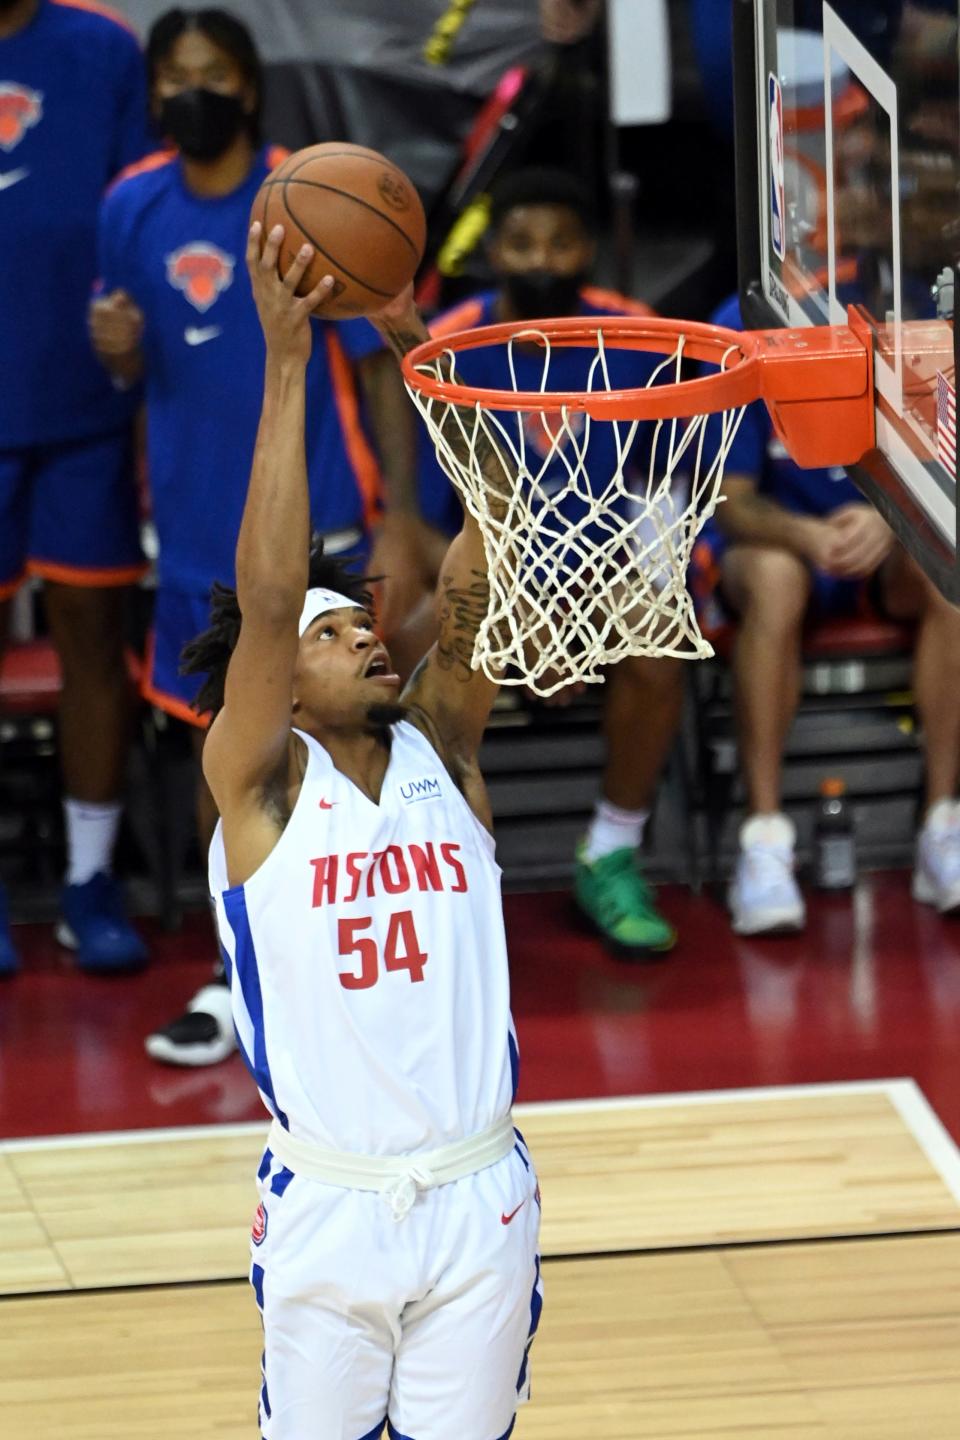 Pistons forward Jamorko Pickett dunks against the Knicks during the Summer League game on Friday, Aug. 13, 2021, in Las Vegas.